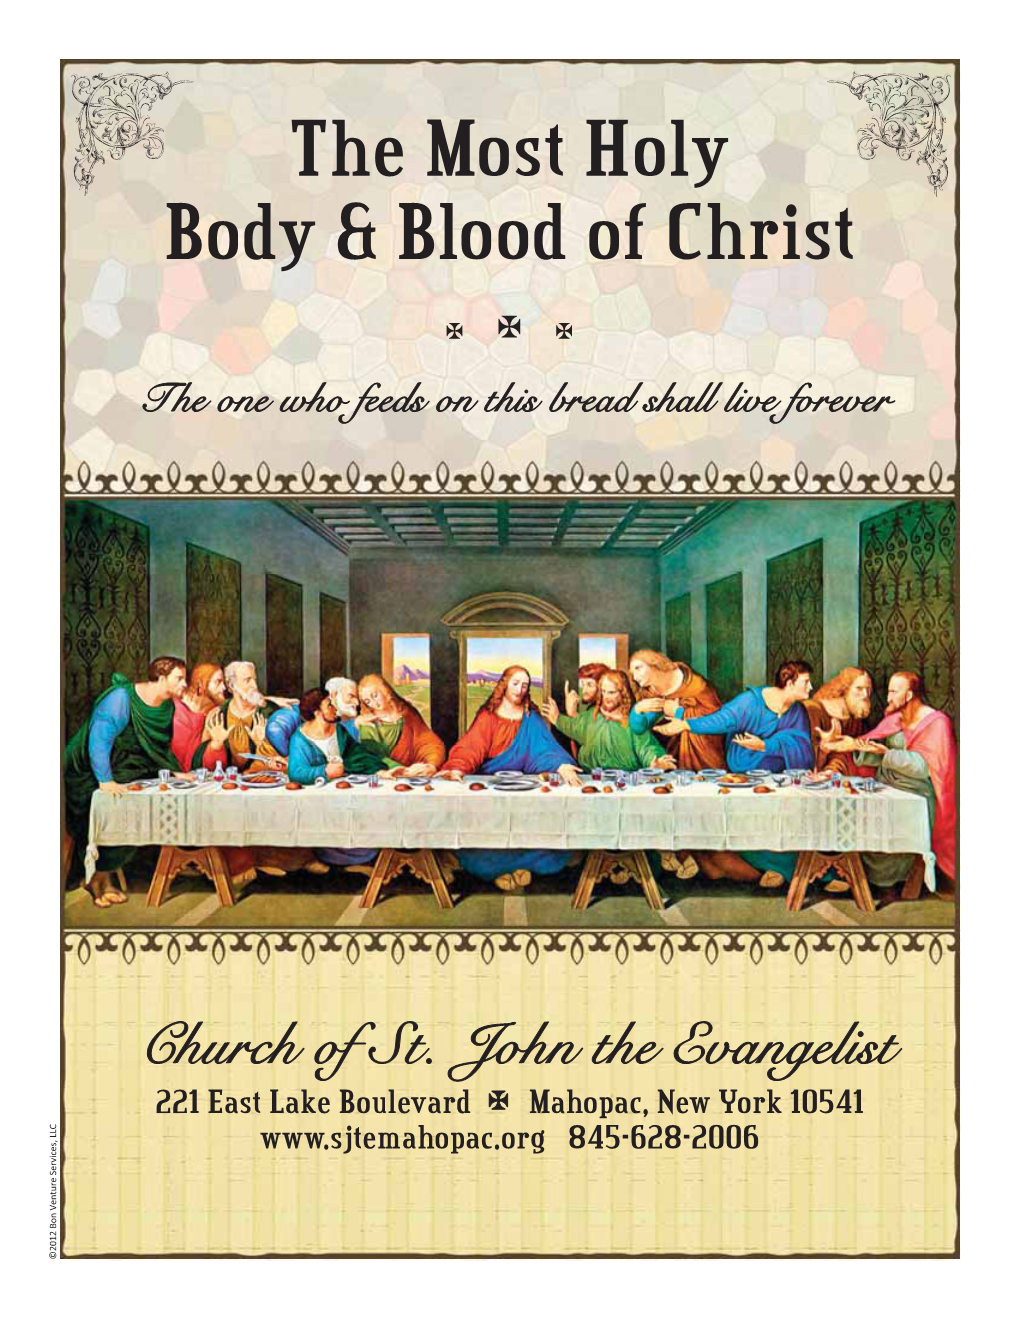 The Most Holy Body & Blood of Christ